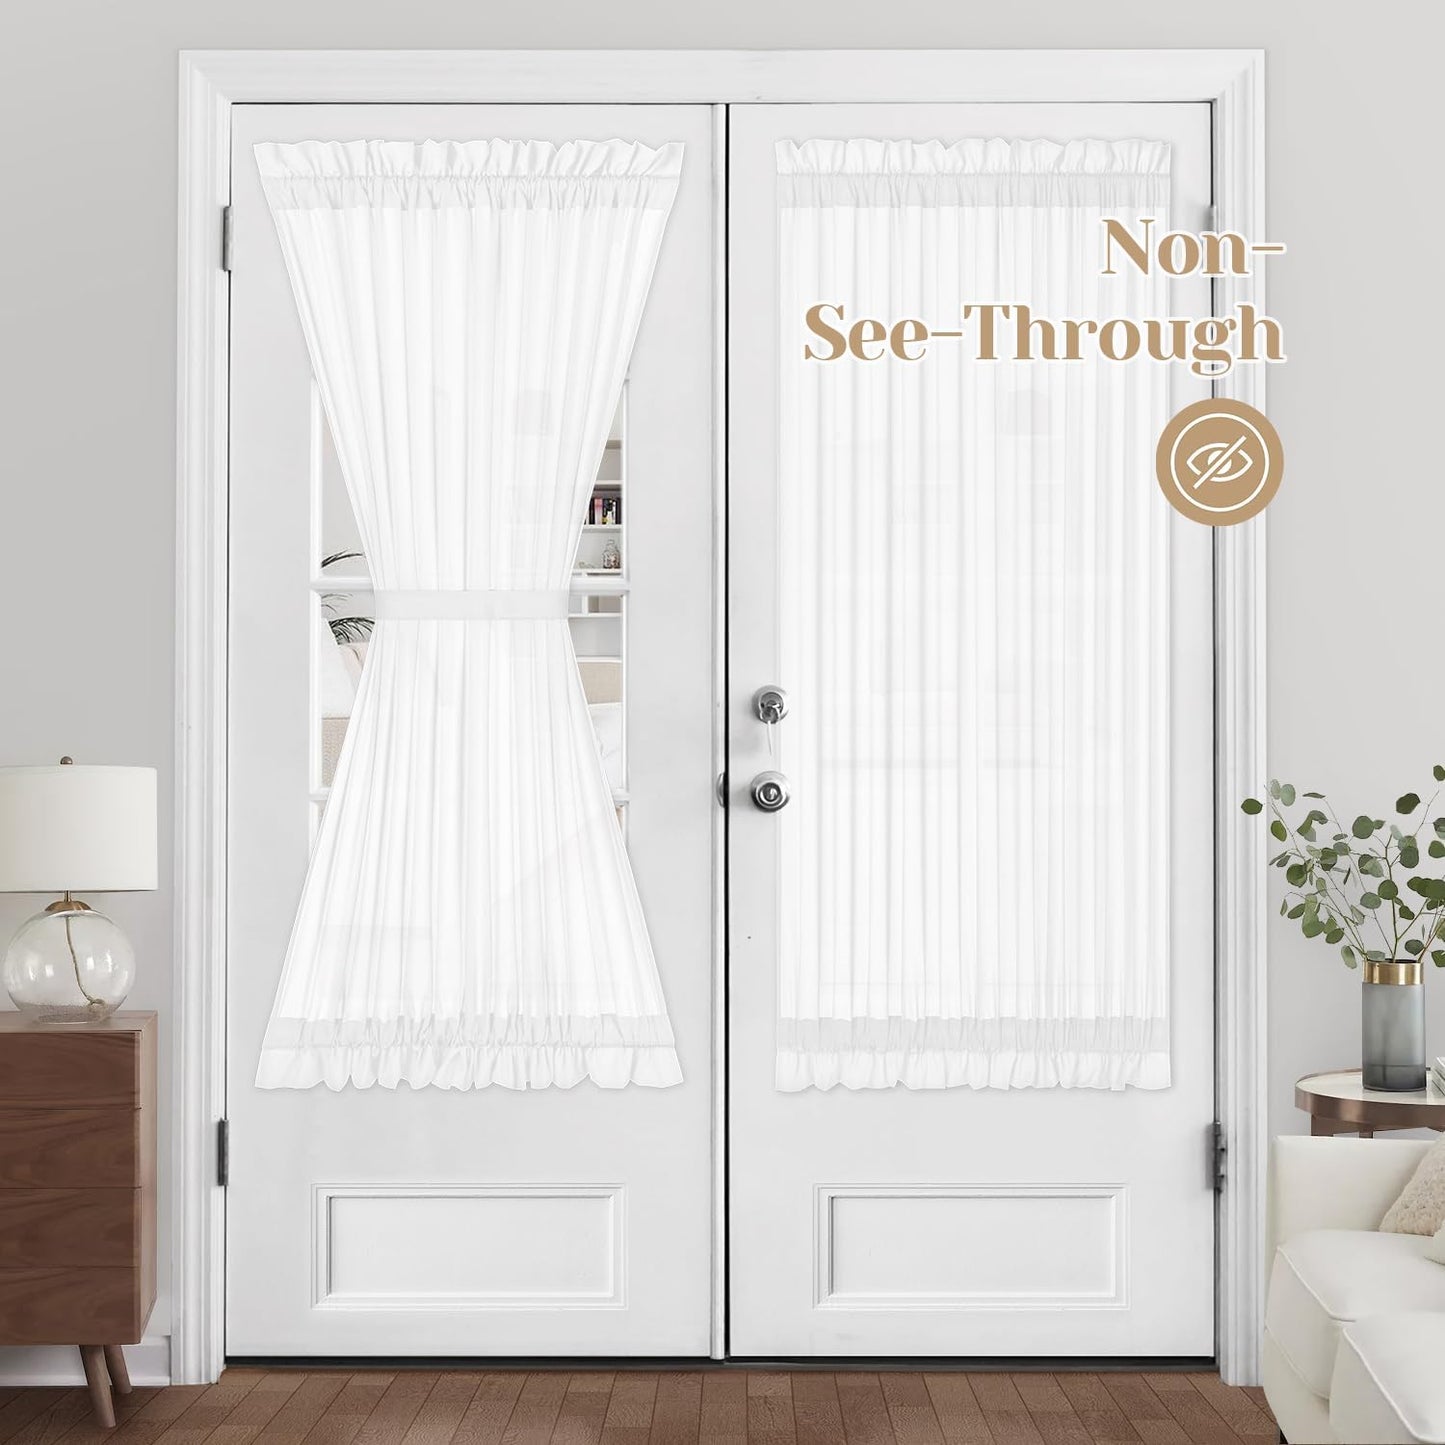 HOMEIDEAS Non-See-Through Sidelight Curtains for Front Door, Privacy Semi Sheer Door Window Curtains, Rod Pocket Light Filtering French Door Curtains with Tieback, (1 Panel, White, 26W X 72L)  HOMEIDEAS White 1 Panel-54 X 72 